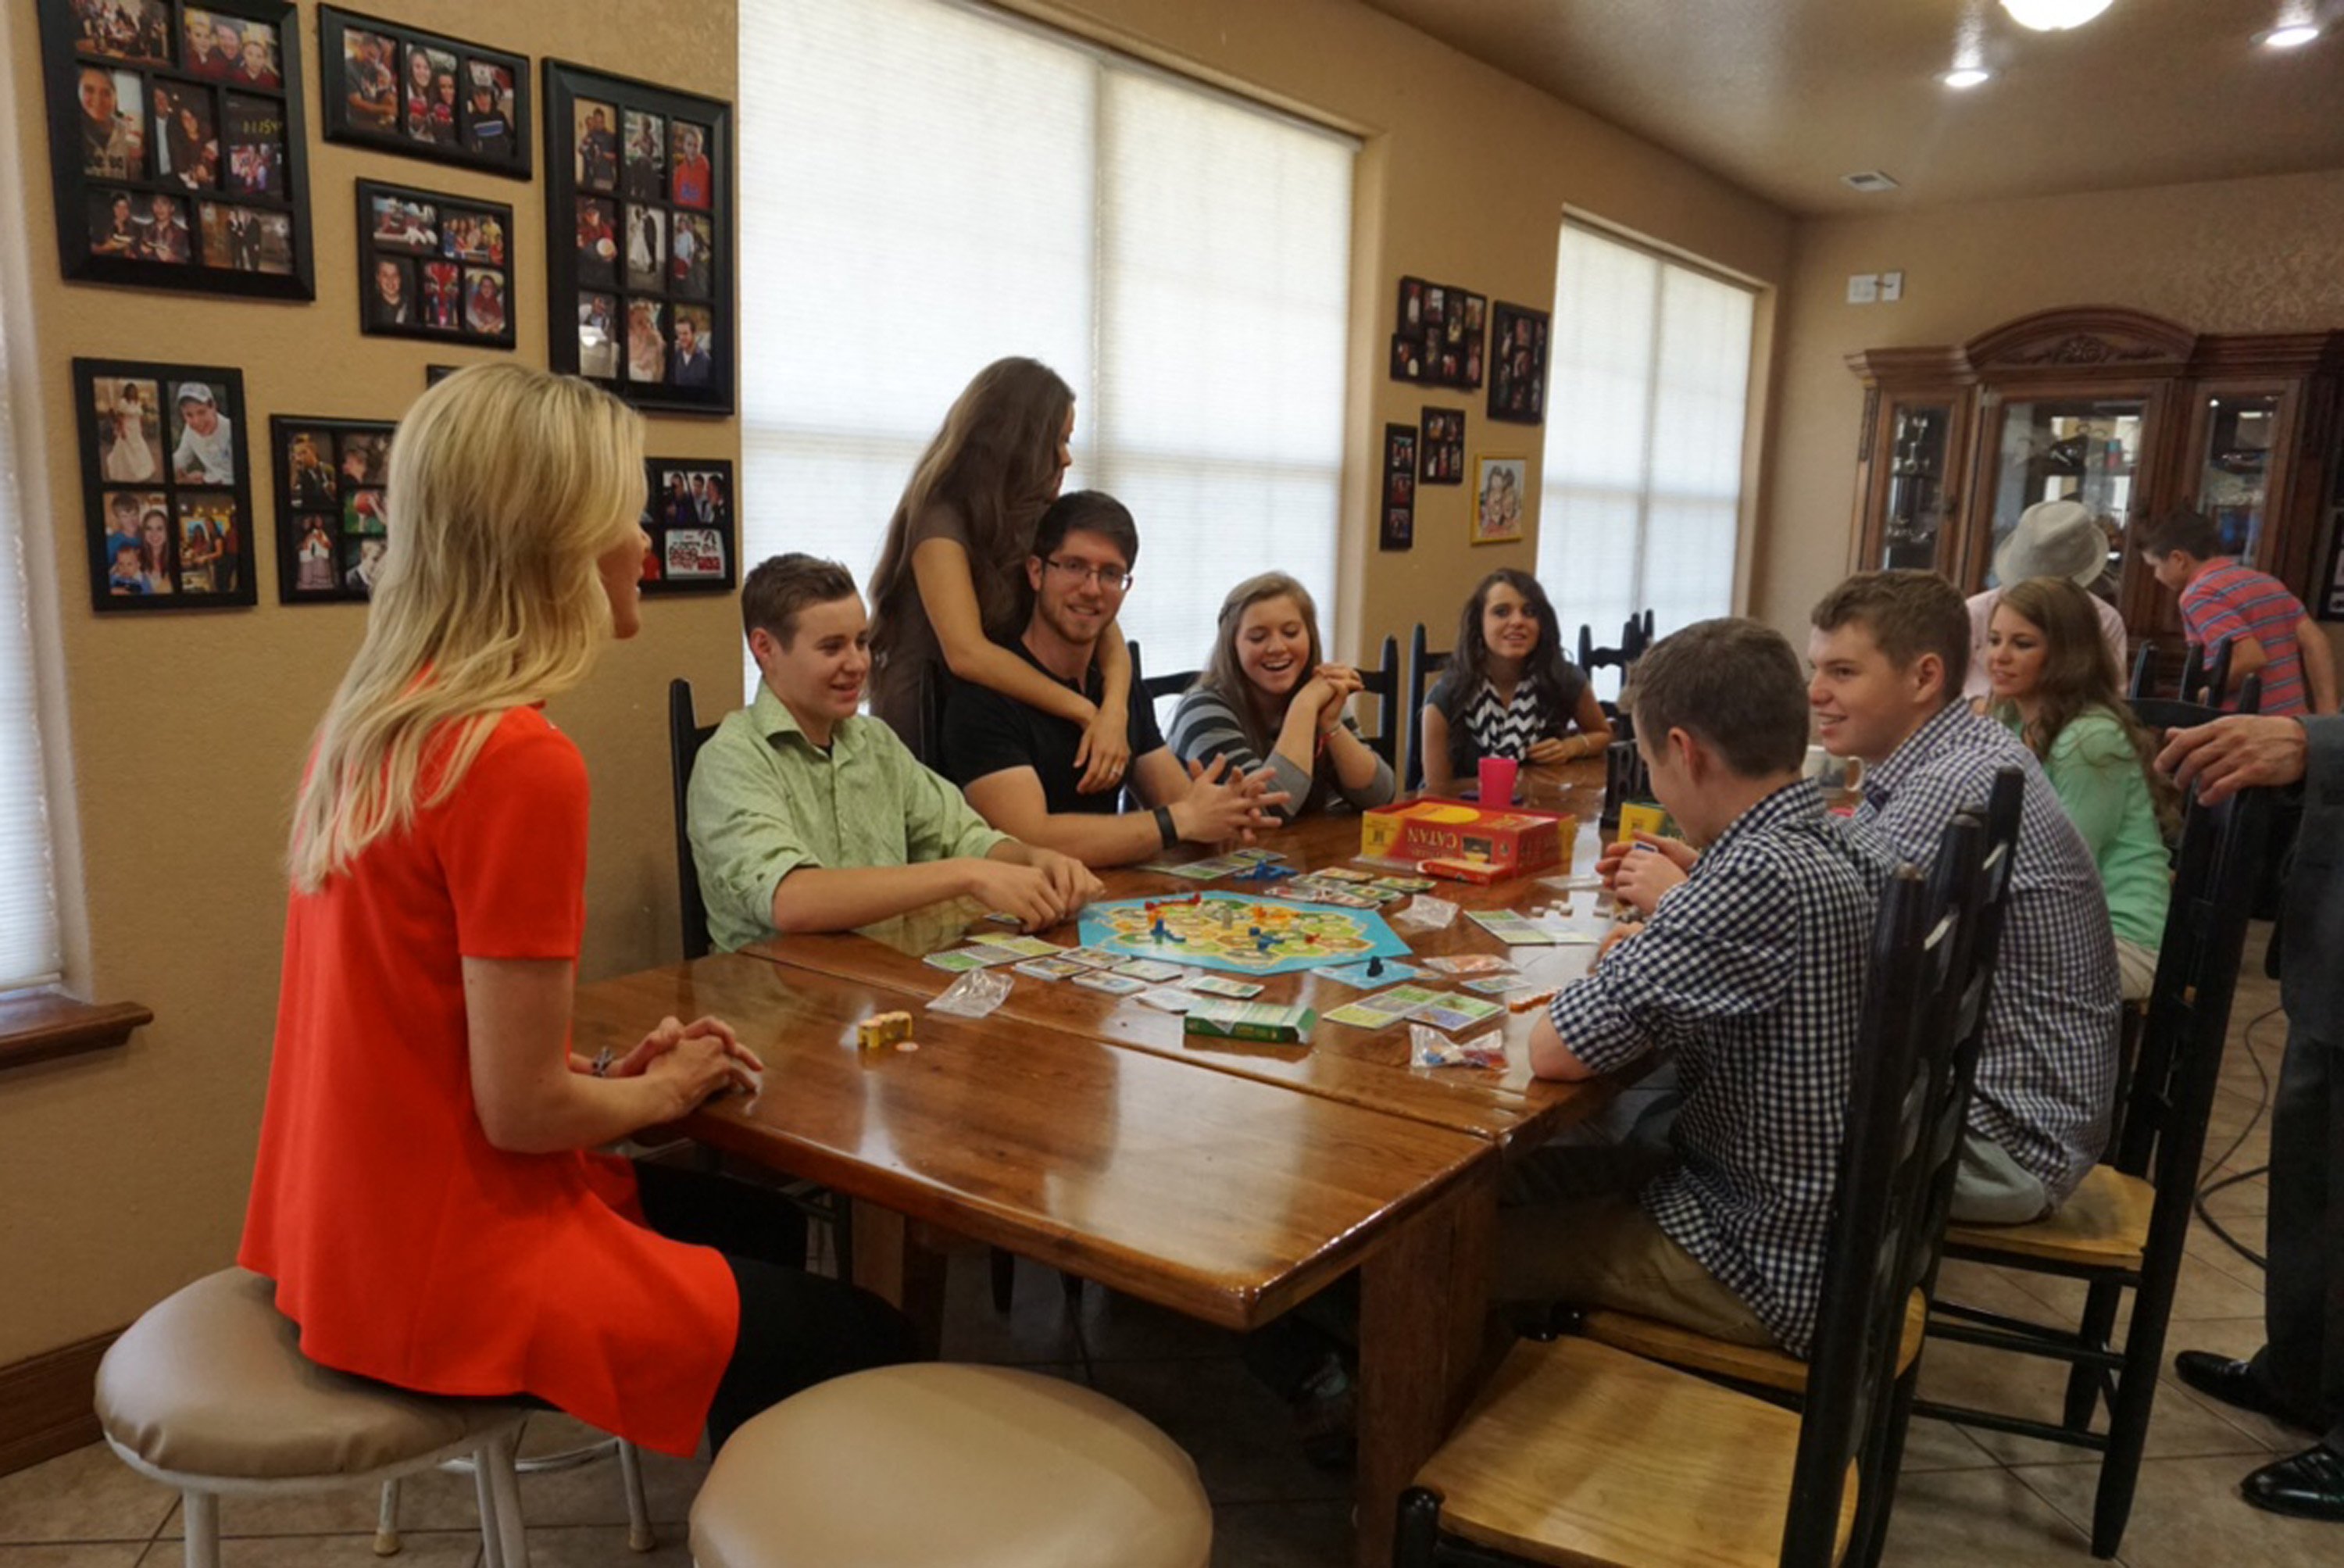 Members of the Duggar family at the dining table